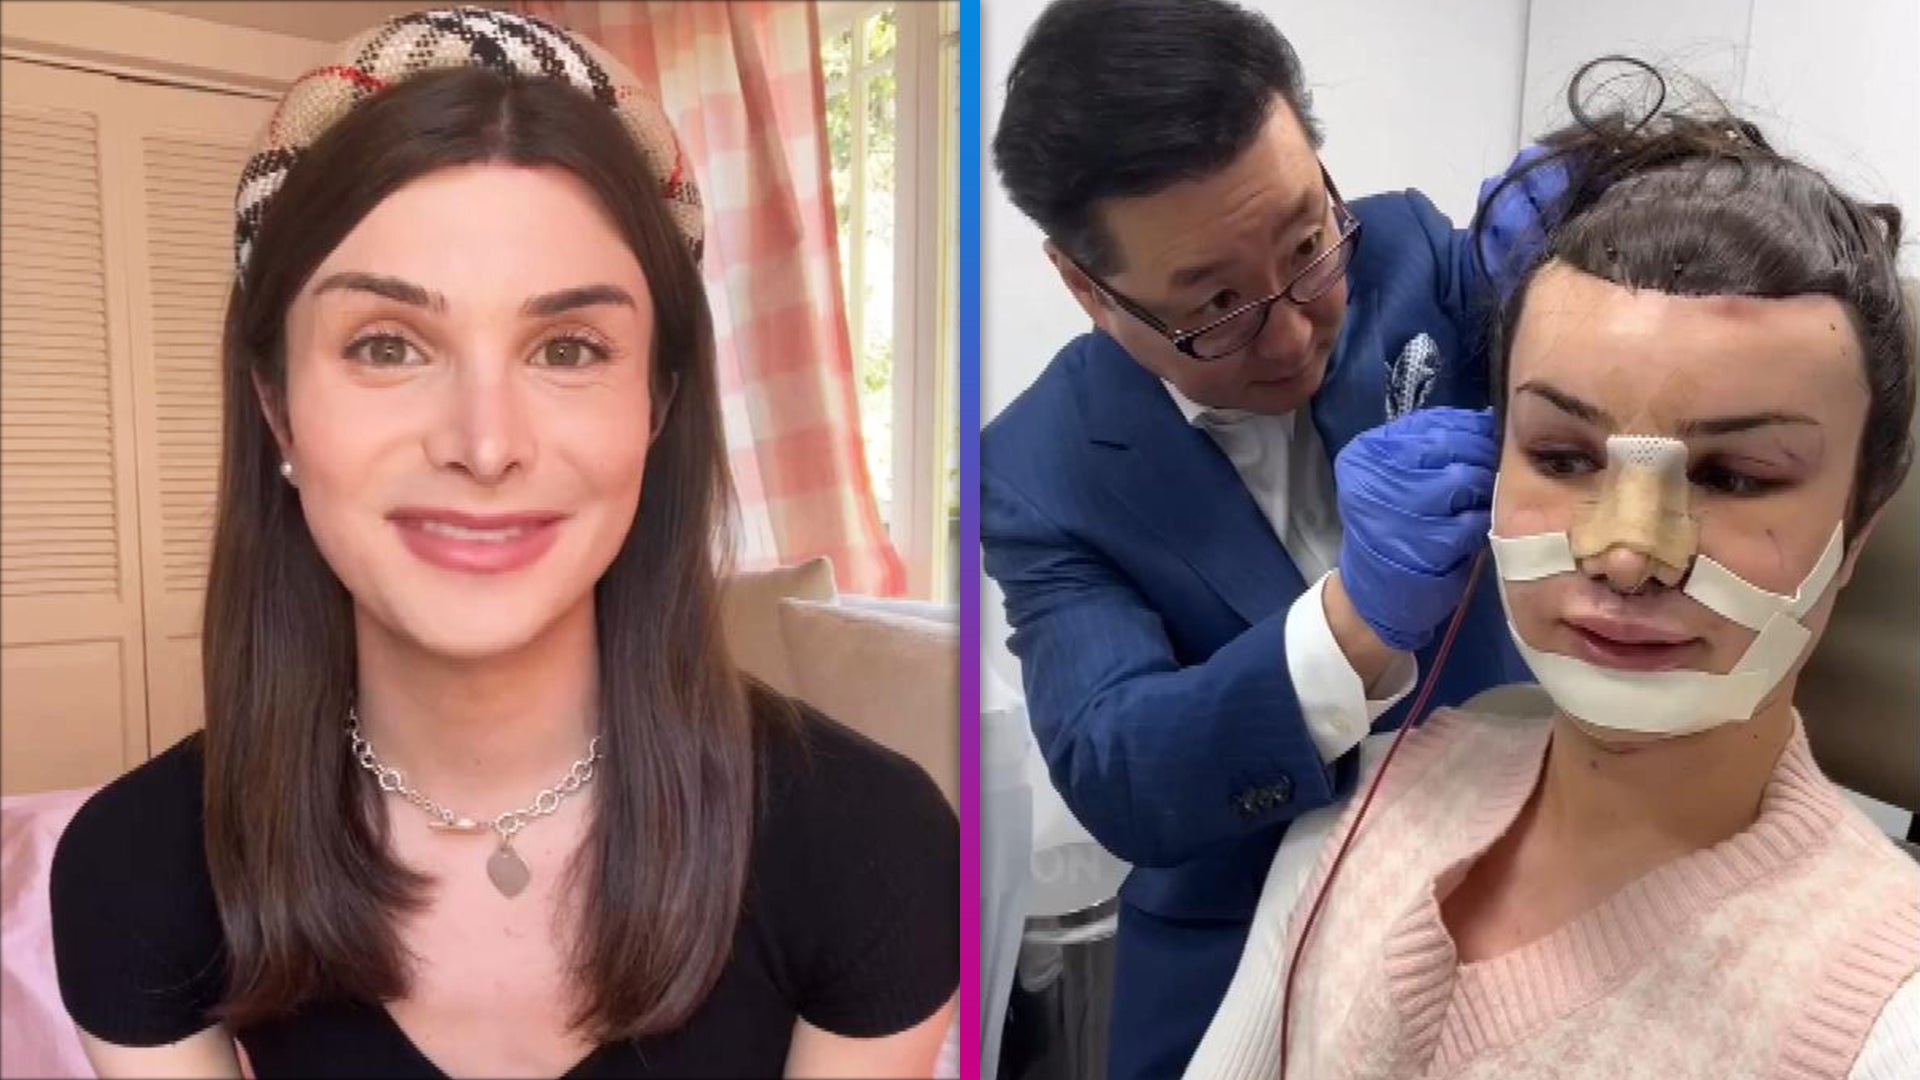 Dylan Mulvaney Reveals Her Face After Feminization Surgery in Glamorous Video Entertainment Tonight pic